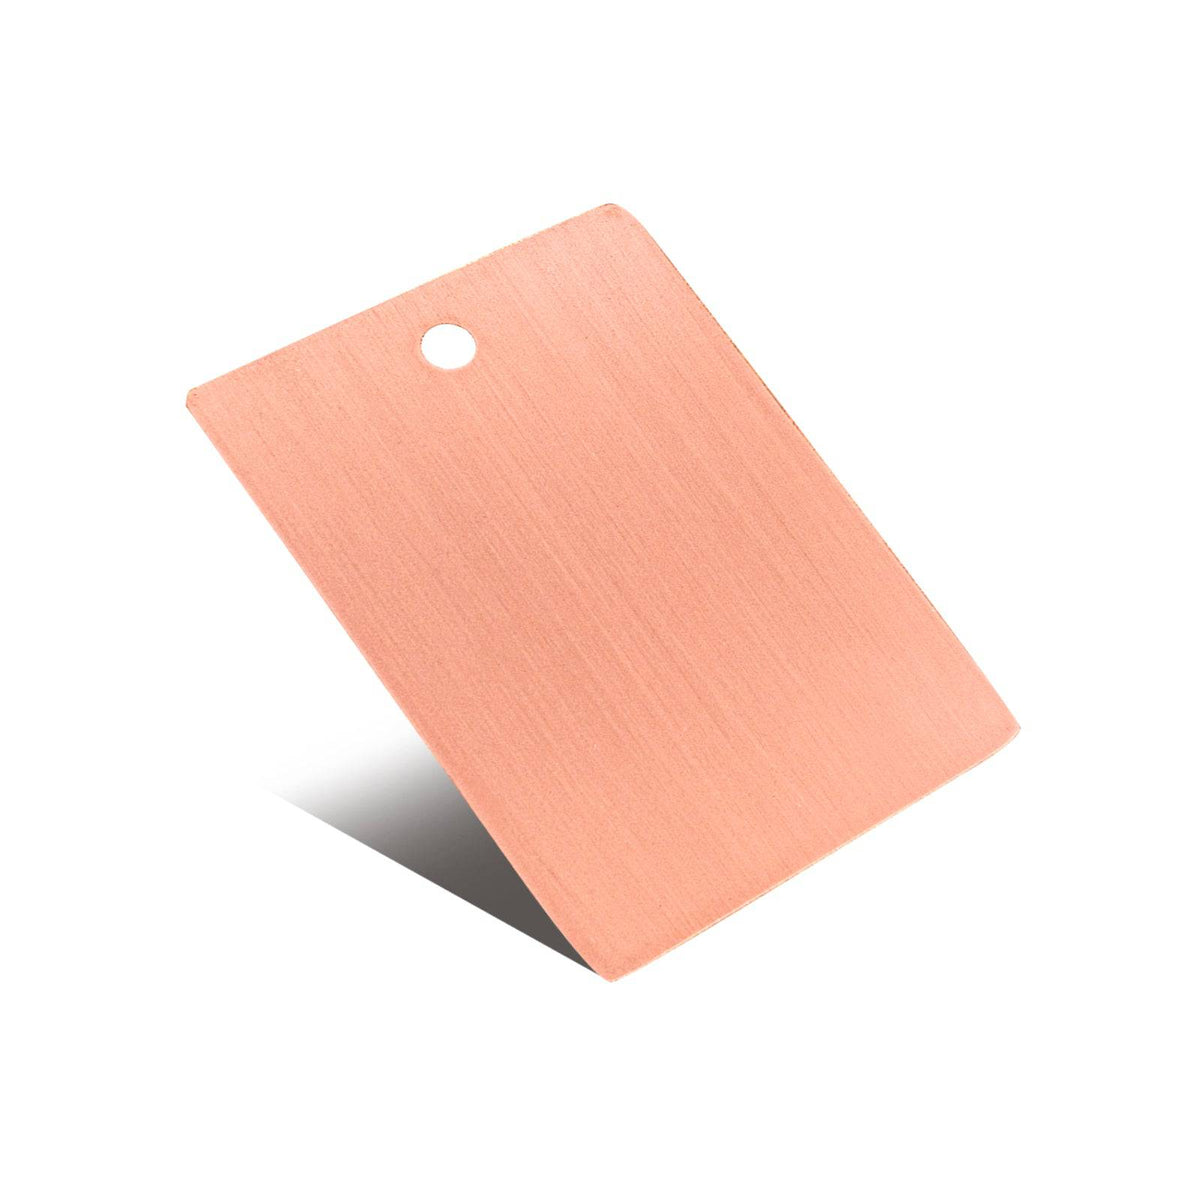 Fobest Copper Samples-Natural Copper Smooth Texture - Copper Samples-Fobest Appliance